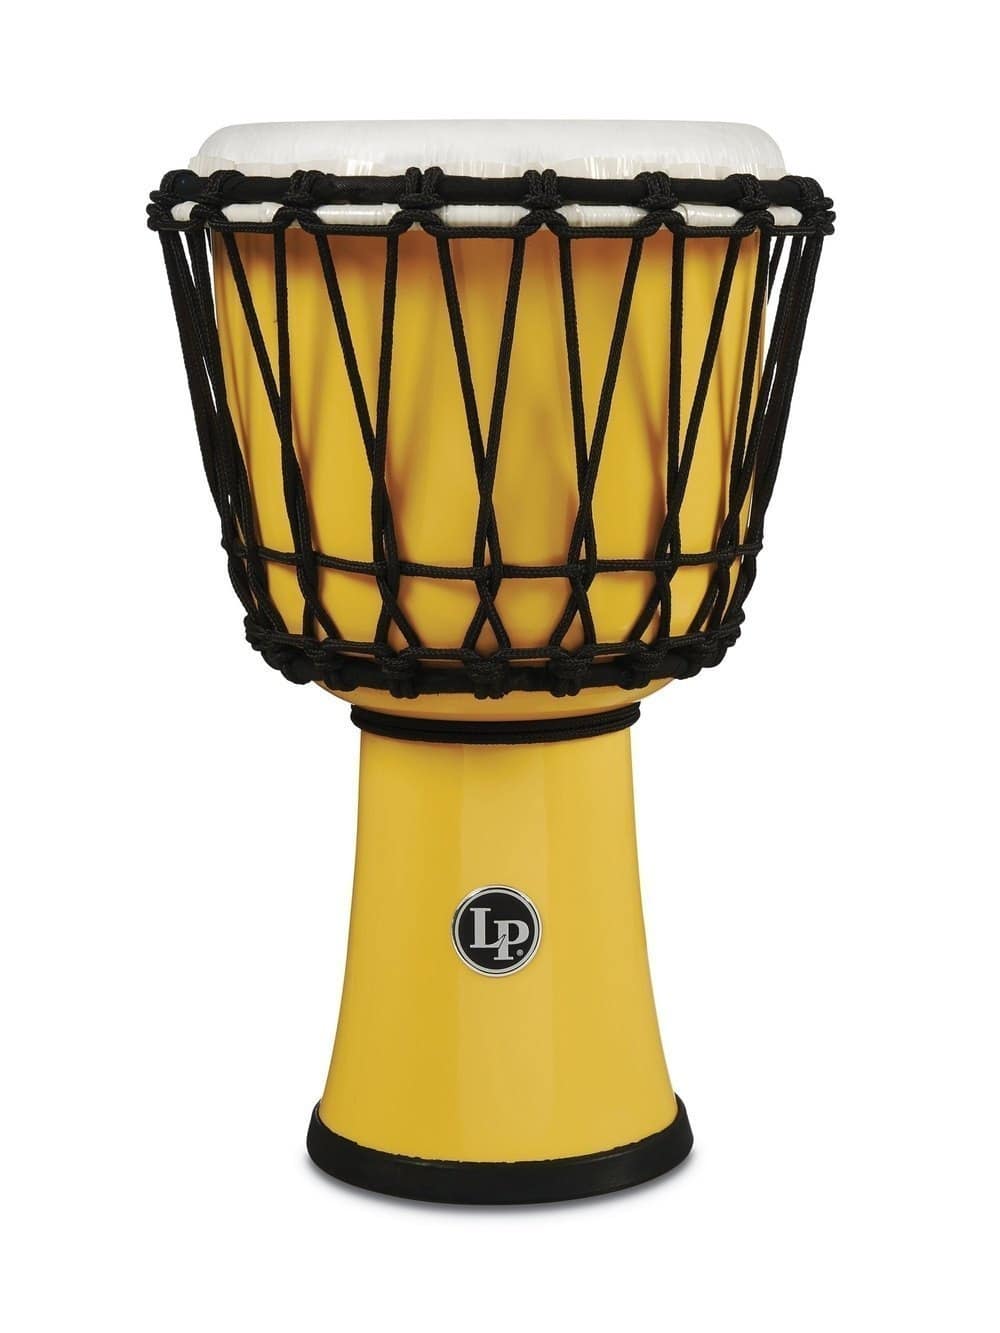 LP LATIN PERCUSSION LP1607YL DJEMBE WORLD 7-INCH ROPE TUNED CIRCLE GELB